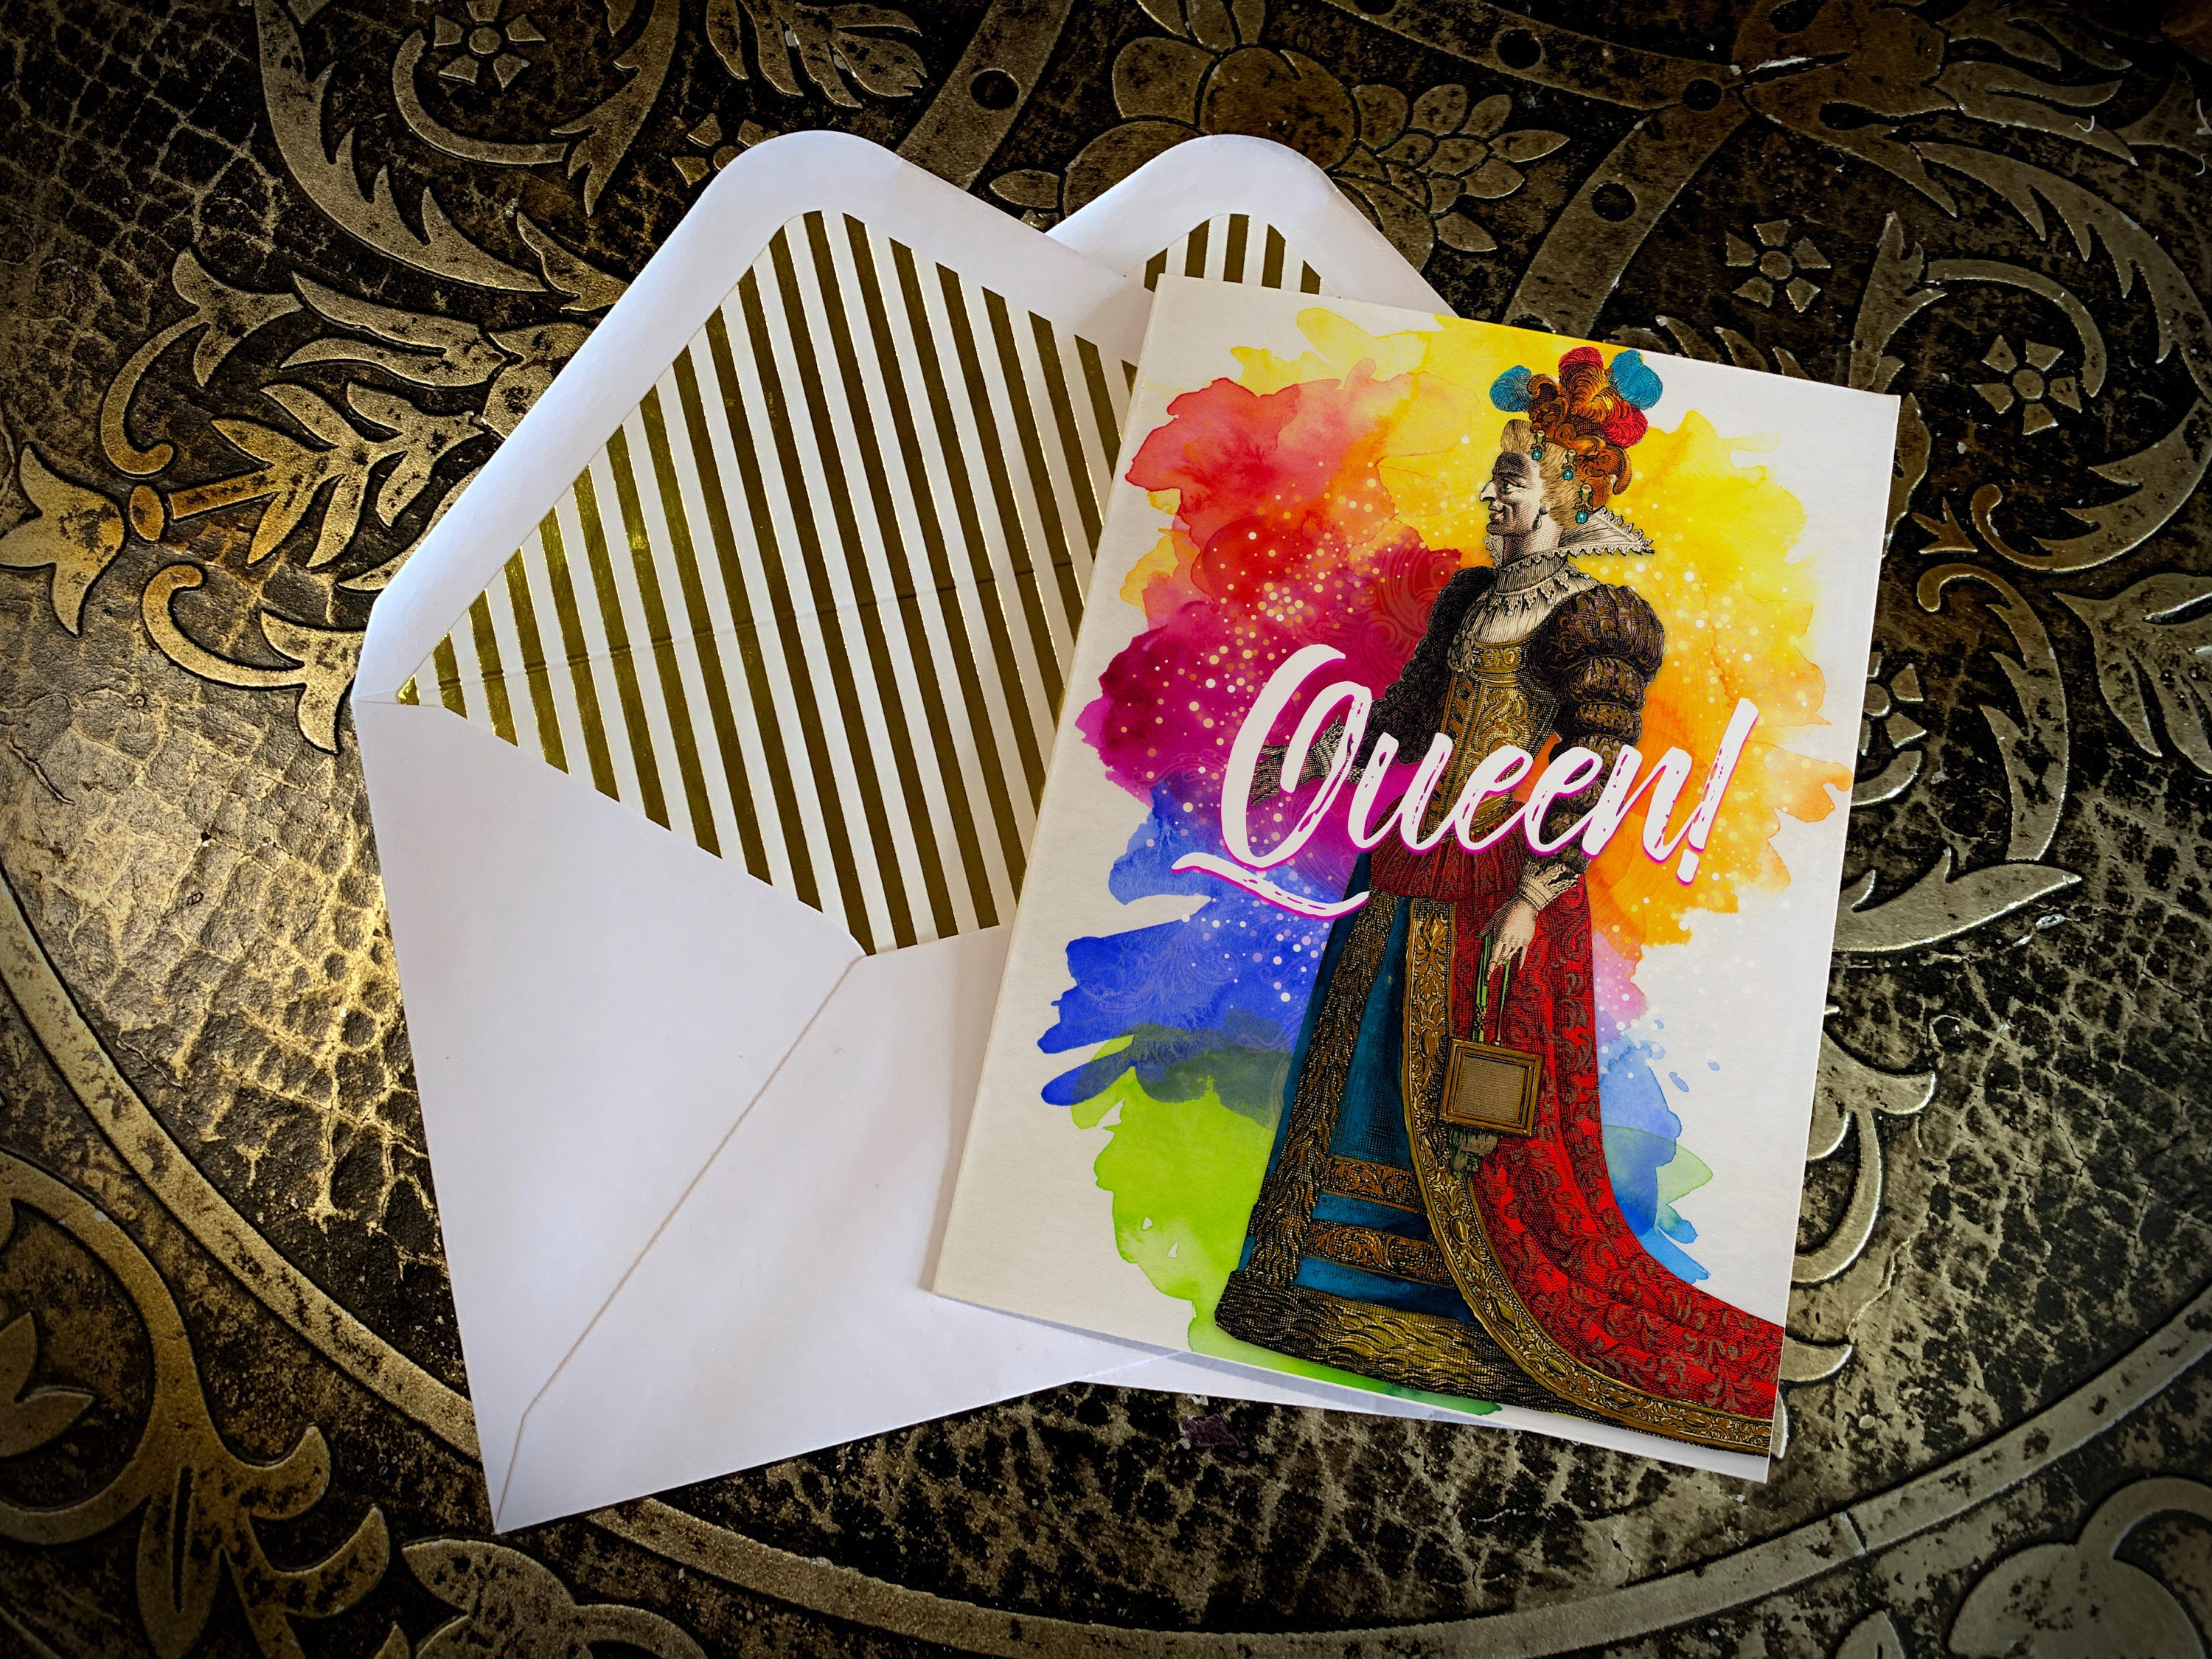 Work It! 18th Century Drag Queen Greeting Card with Elegant Striped Gold Foil Envelope, 1 Card/Envelope